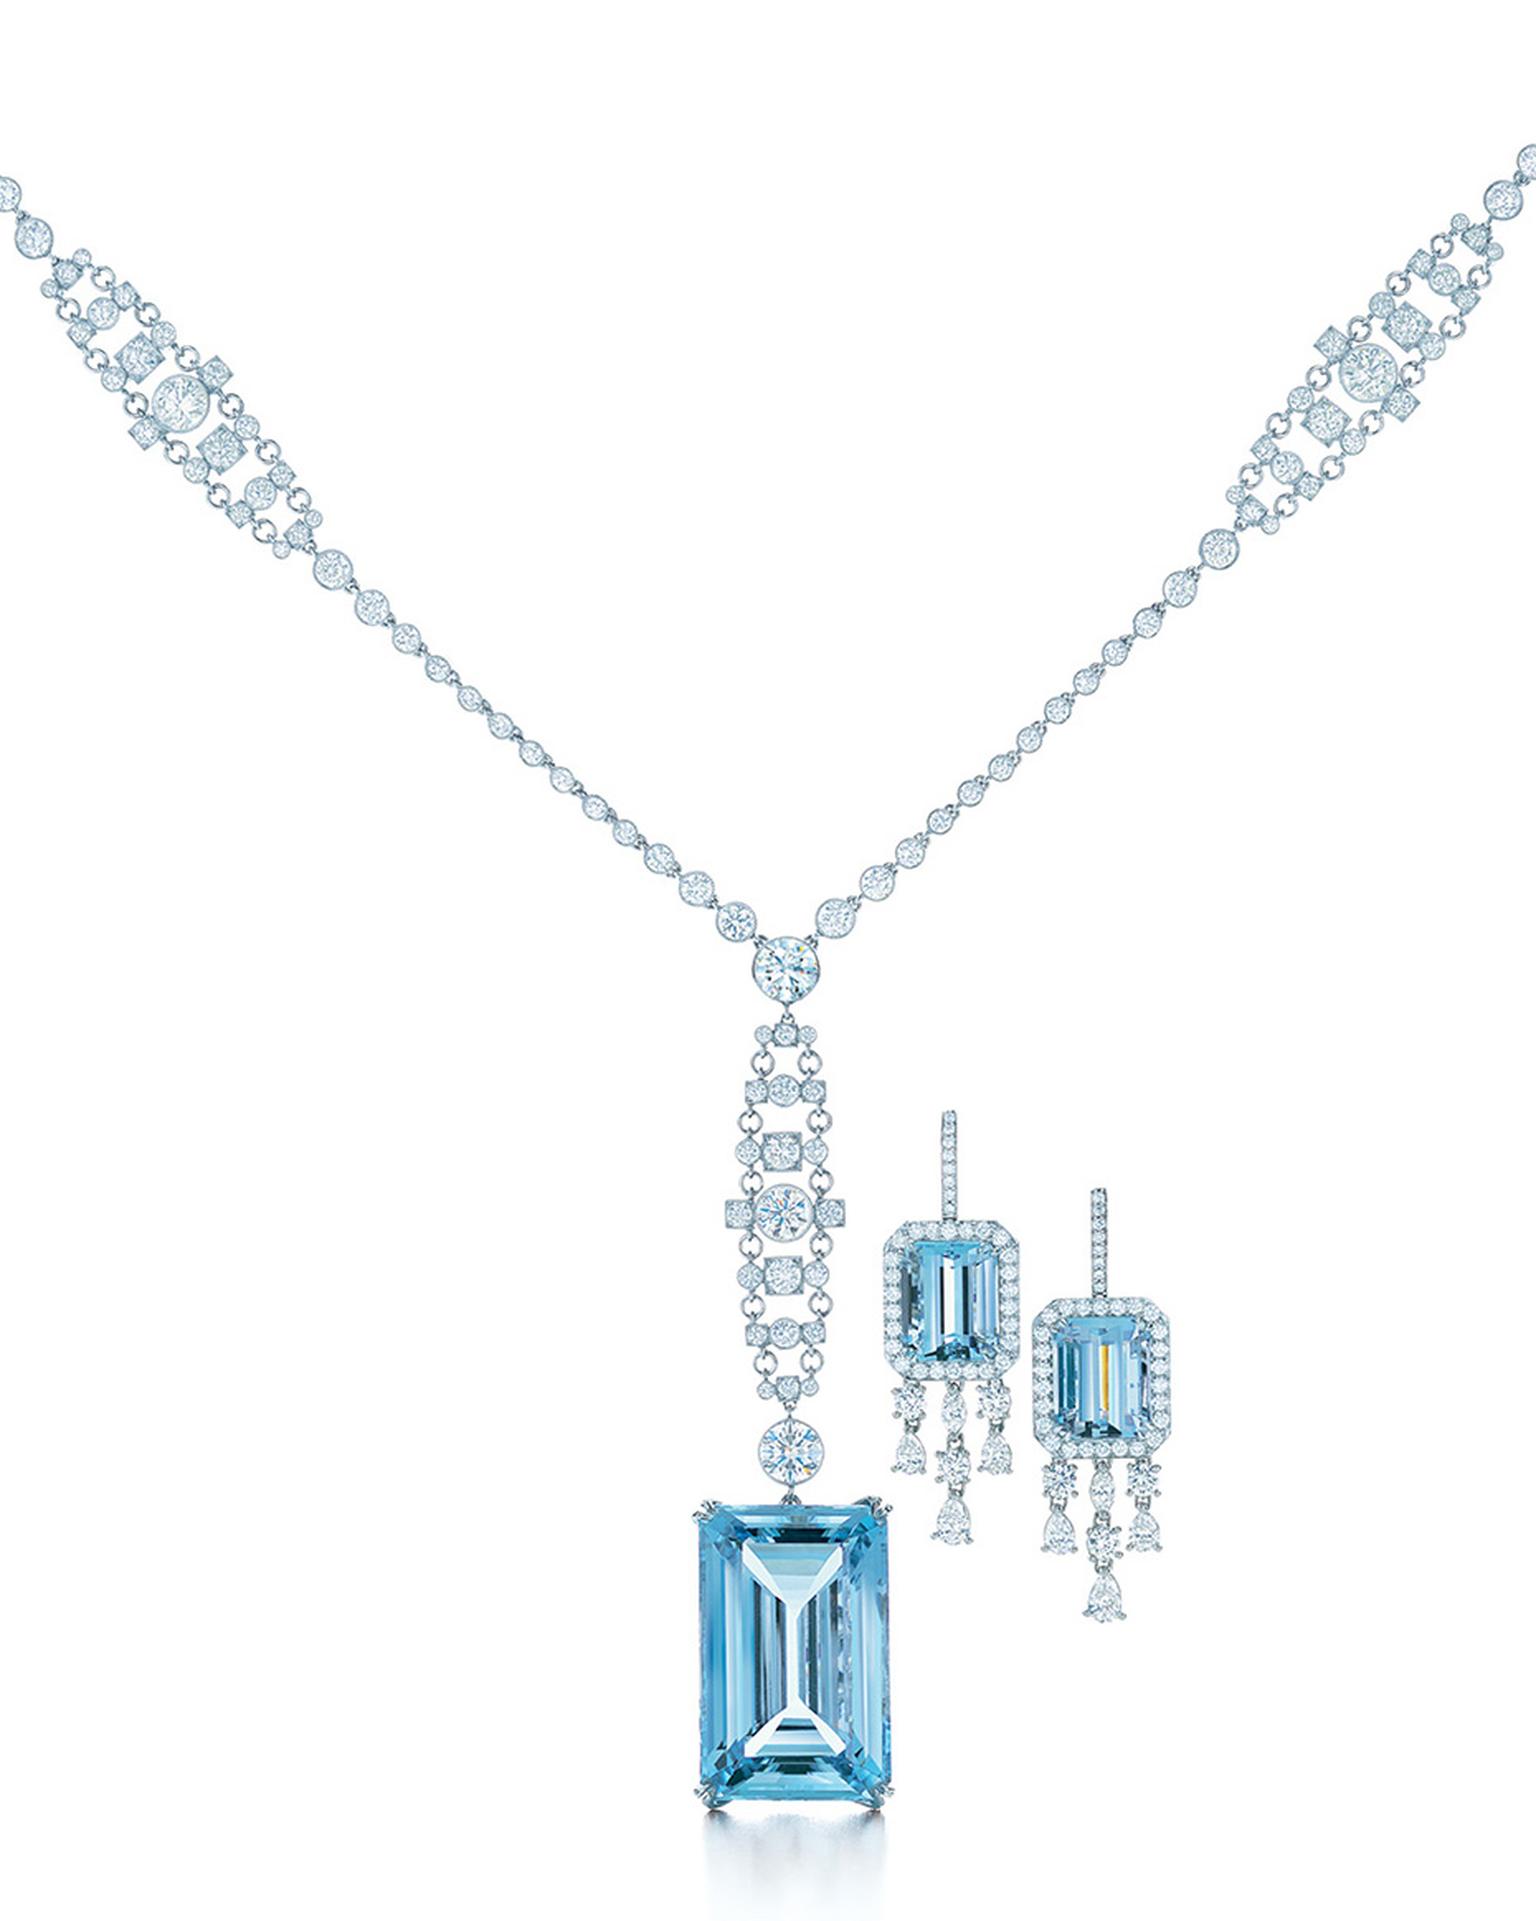 Tiffany's Great Gatsby collection platinum and diamond necklace featuring a 49.59ct emerald cut as well as platinum and diamond earrings with emerald cut aquamarines, as worn in The Great Gatsby film.